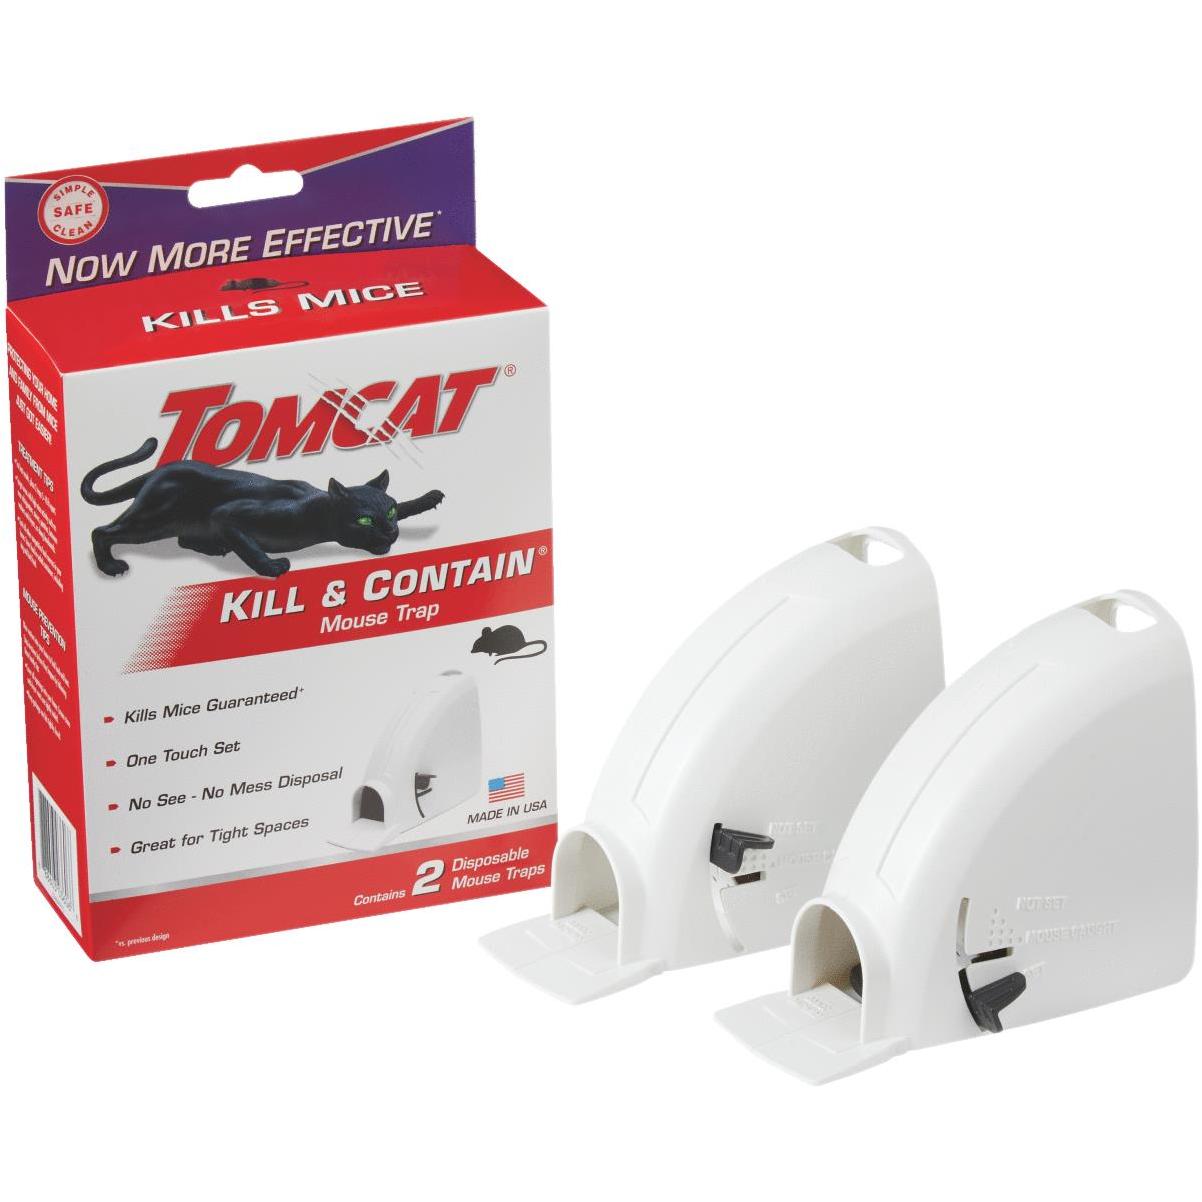 D-Con Ultra-Set Mechanical Covered Mouse Trap (1-Pack)